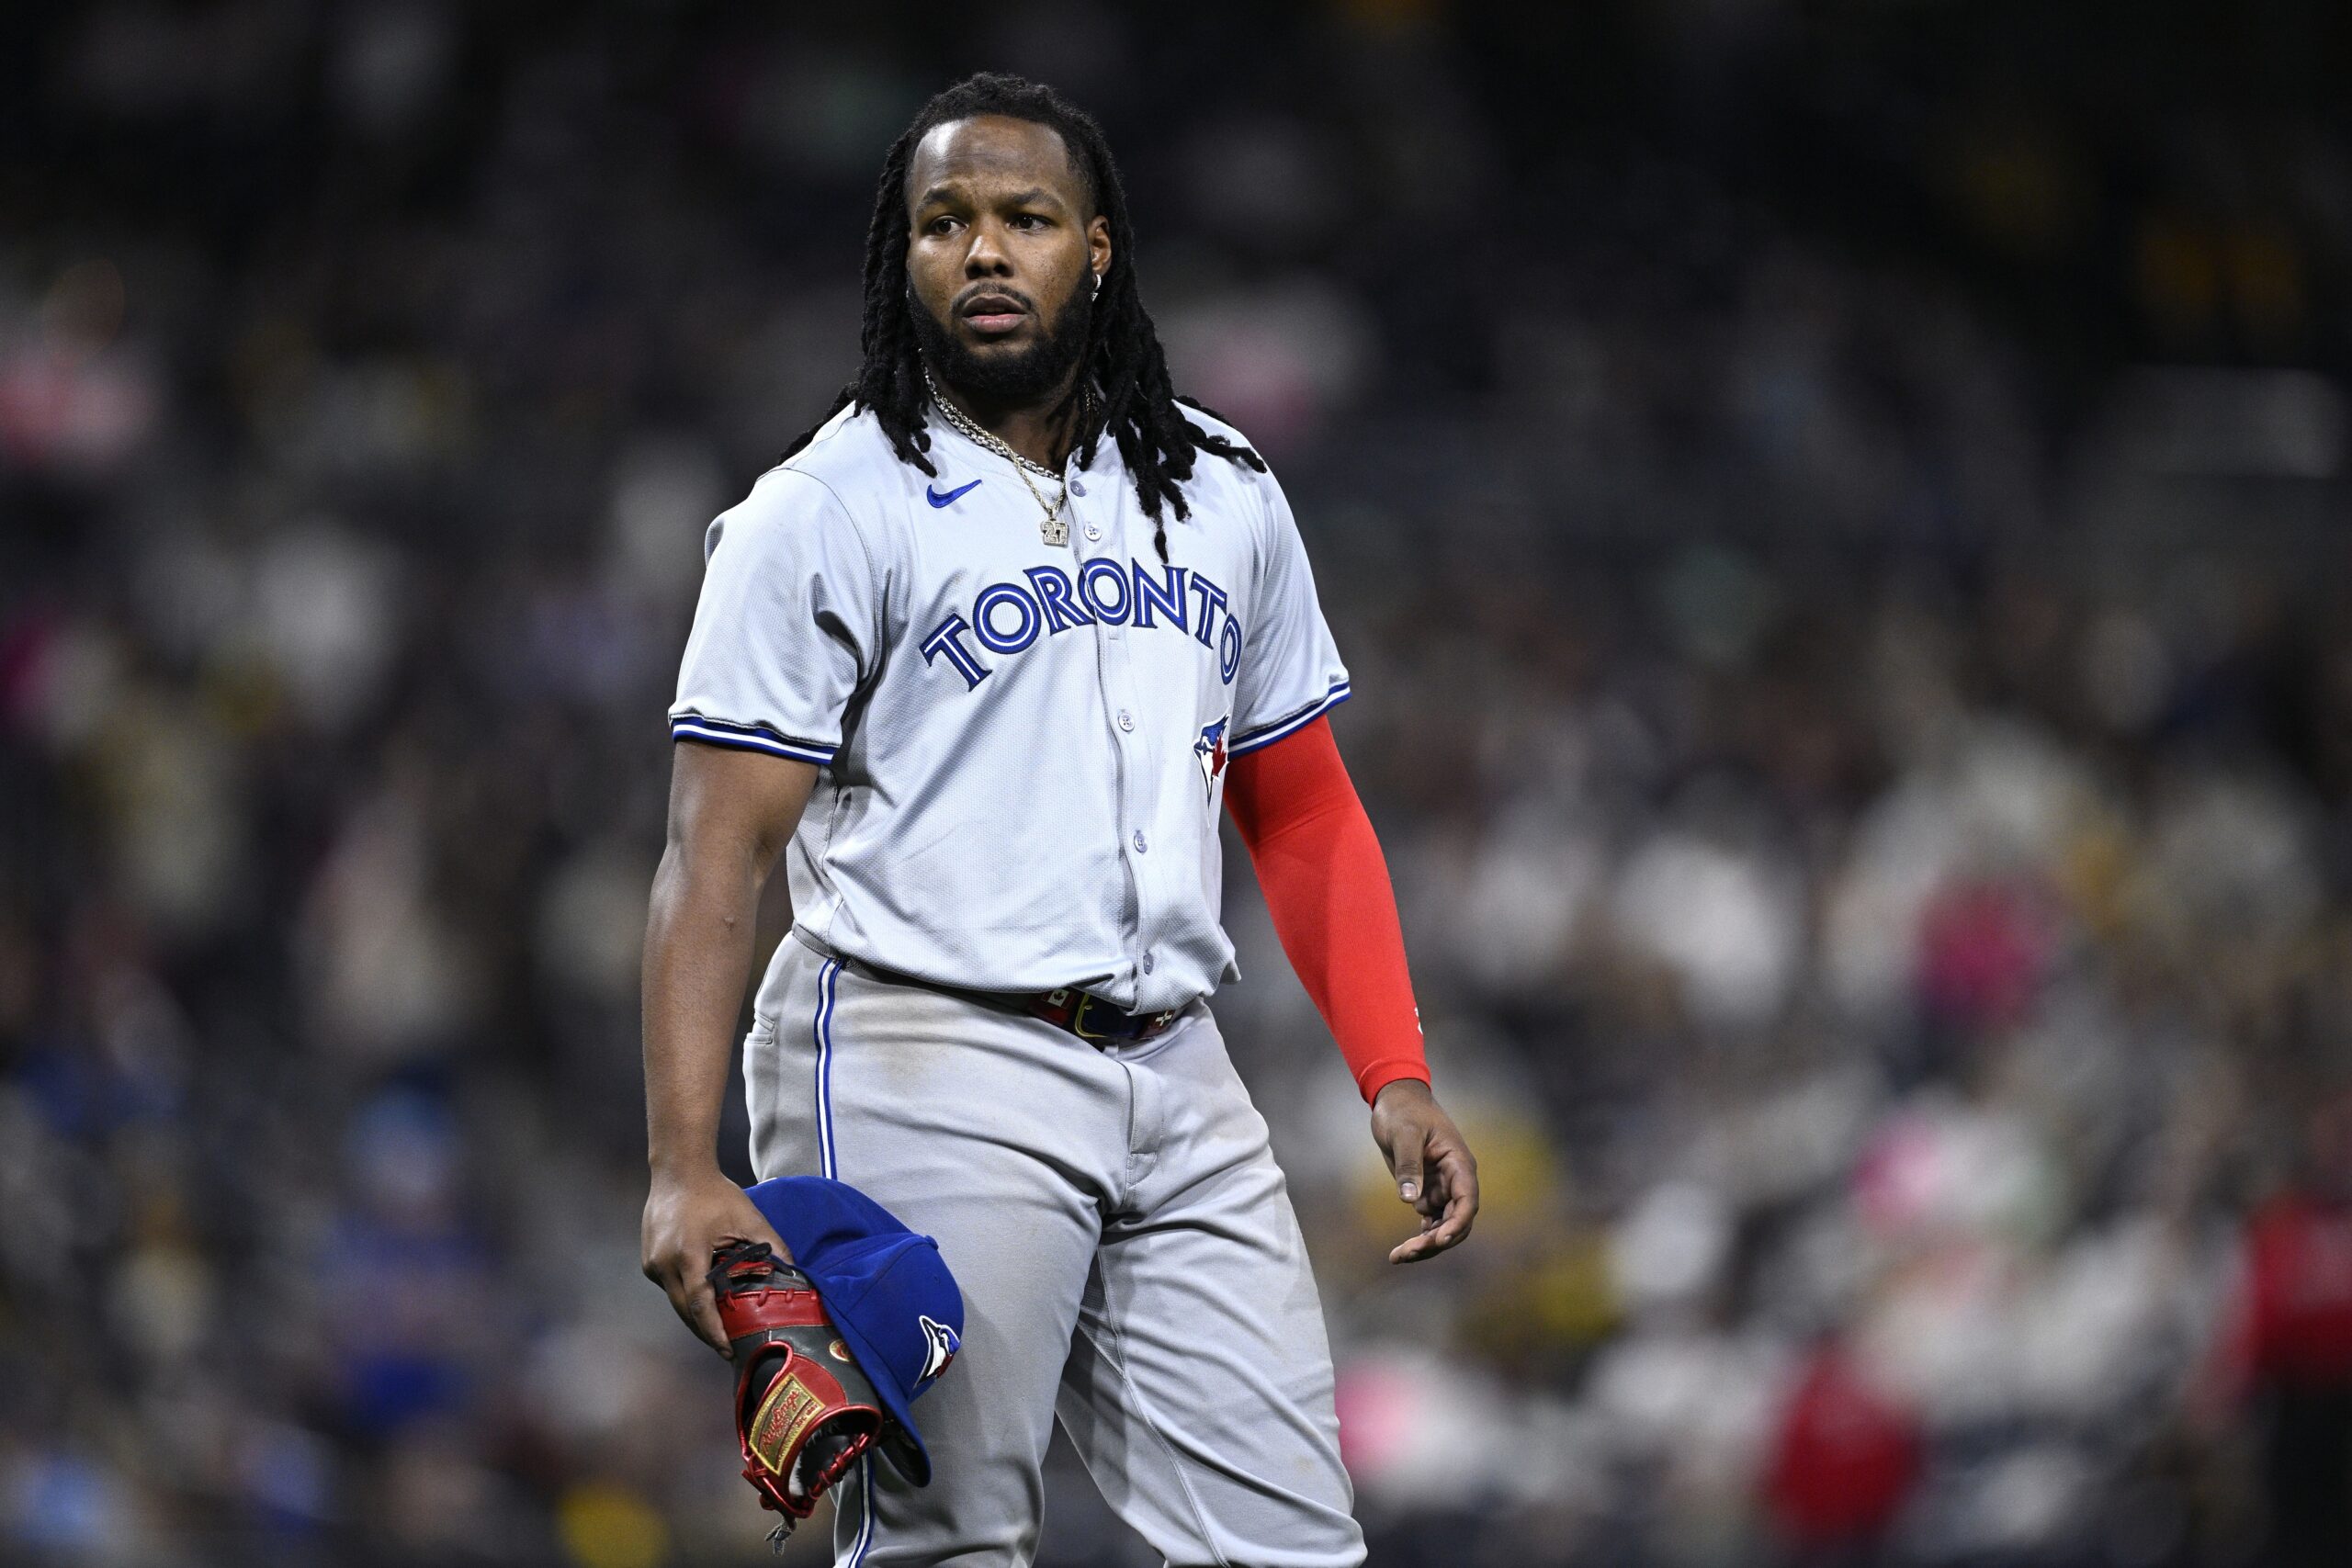 The Blue Jays Need Their Star Back Sooner than Later